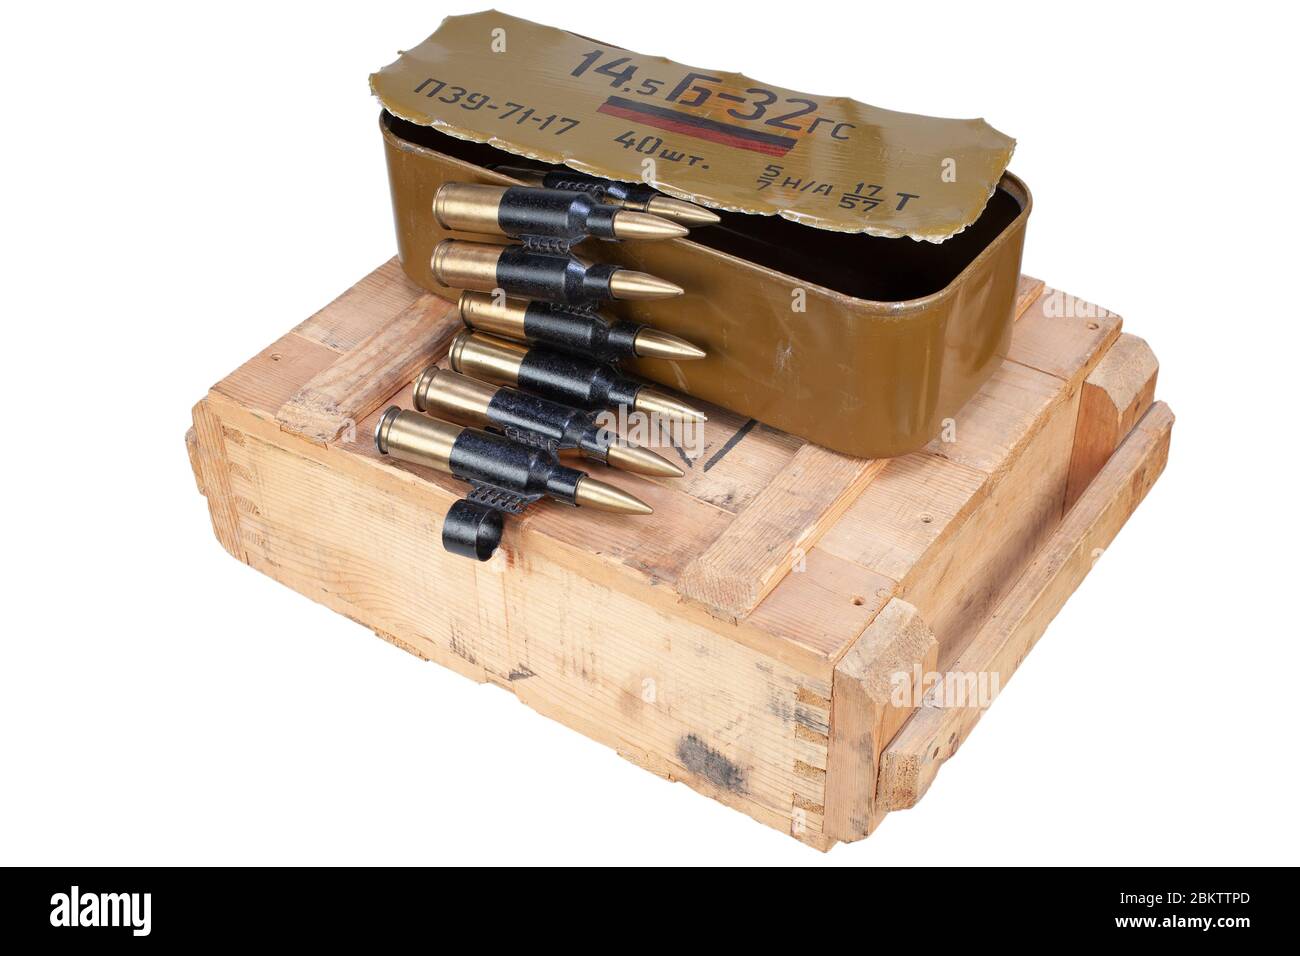 Ammo Box with ammunition belt and 14.5×114mm cartridges for a 14.5 mm KPV heavy machine gun used by the former Soviet Union isolated on white backgrou Stock Photo